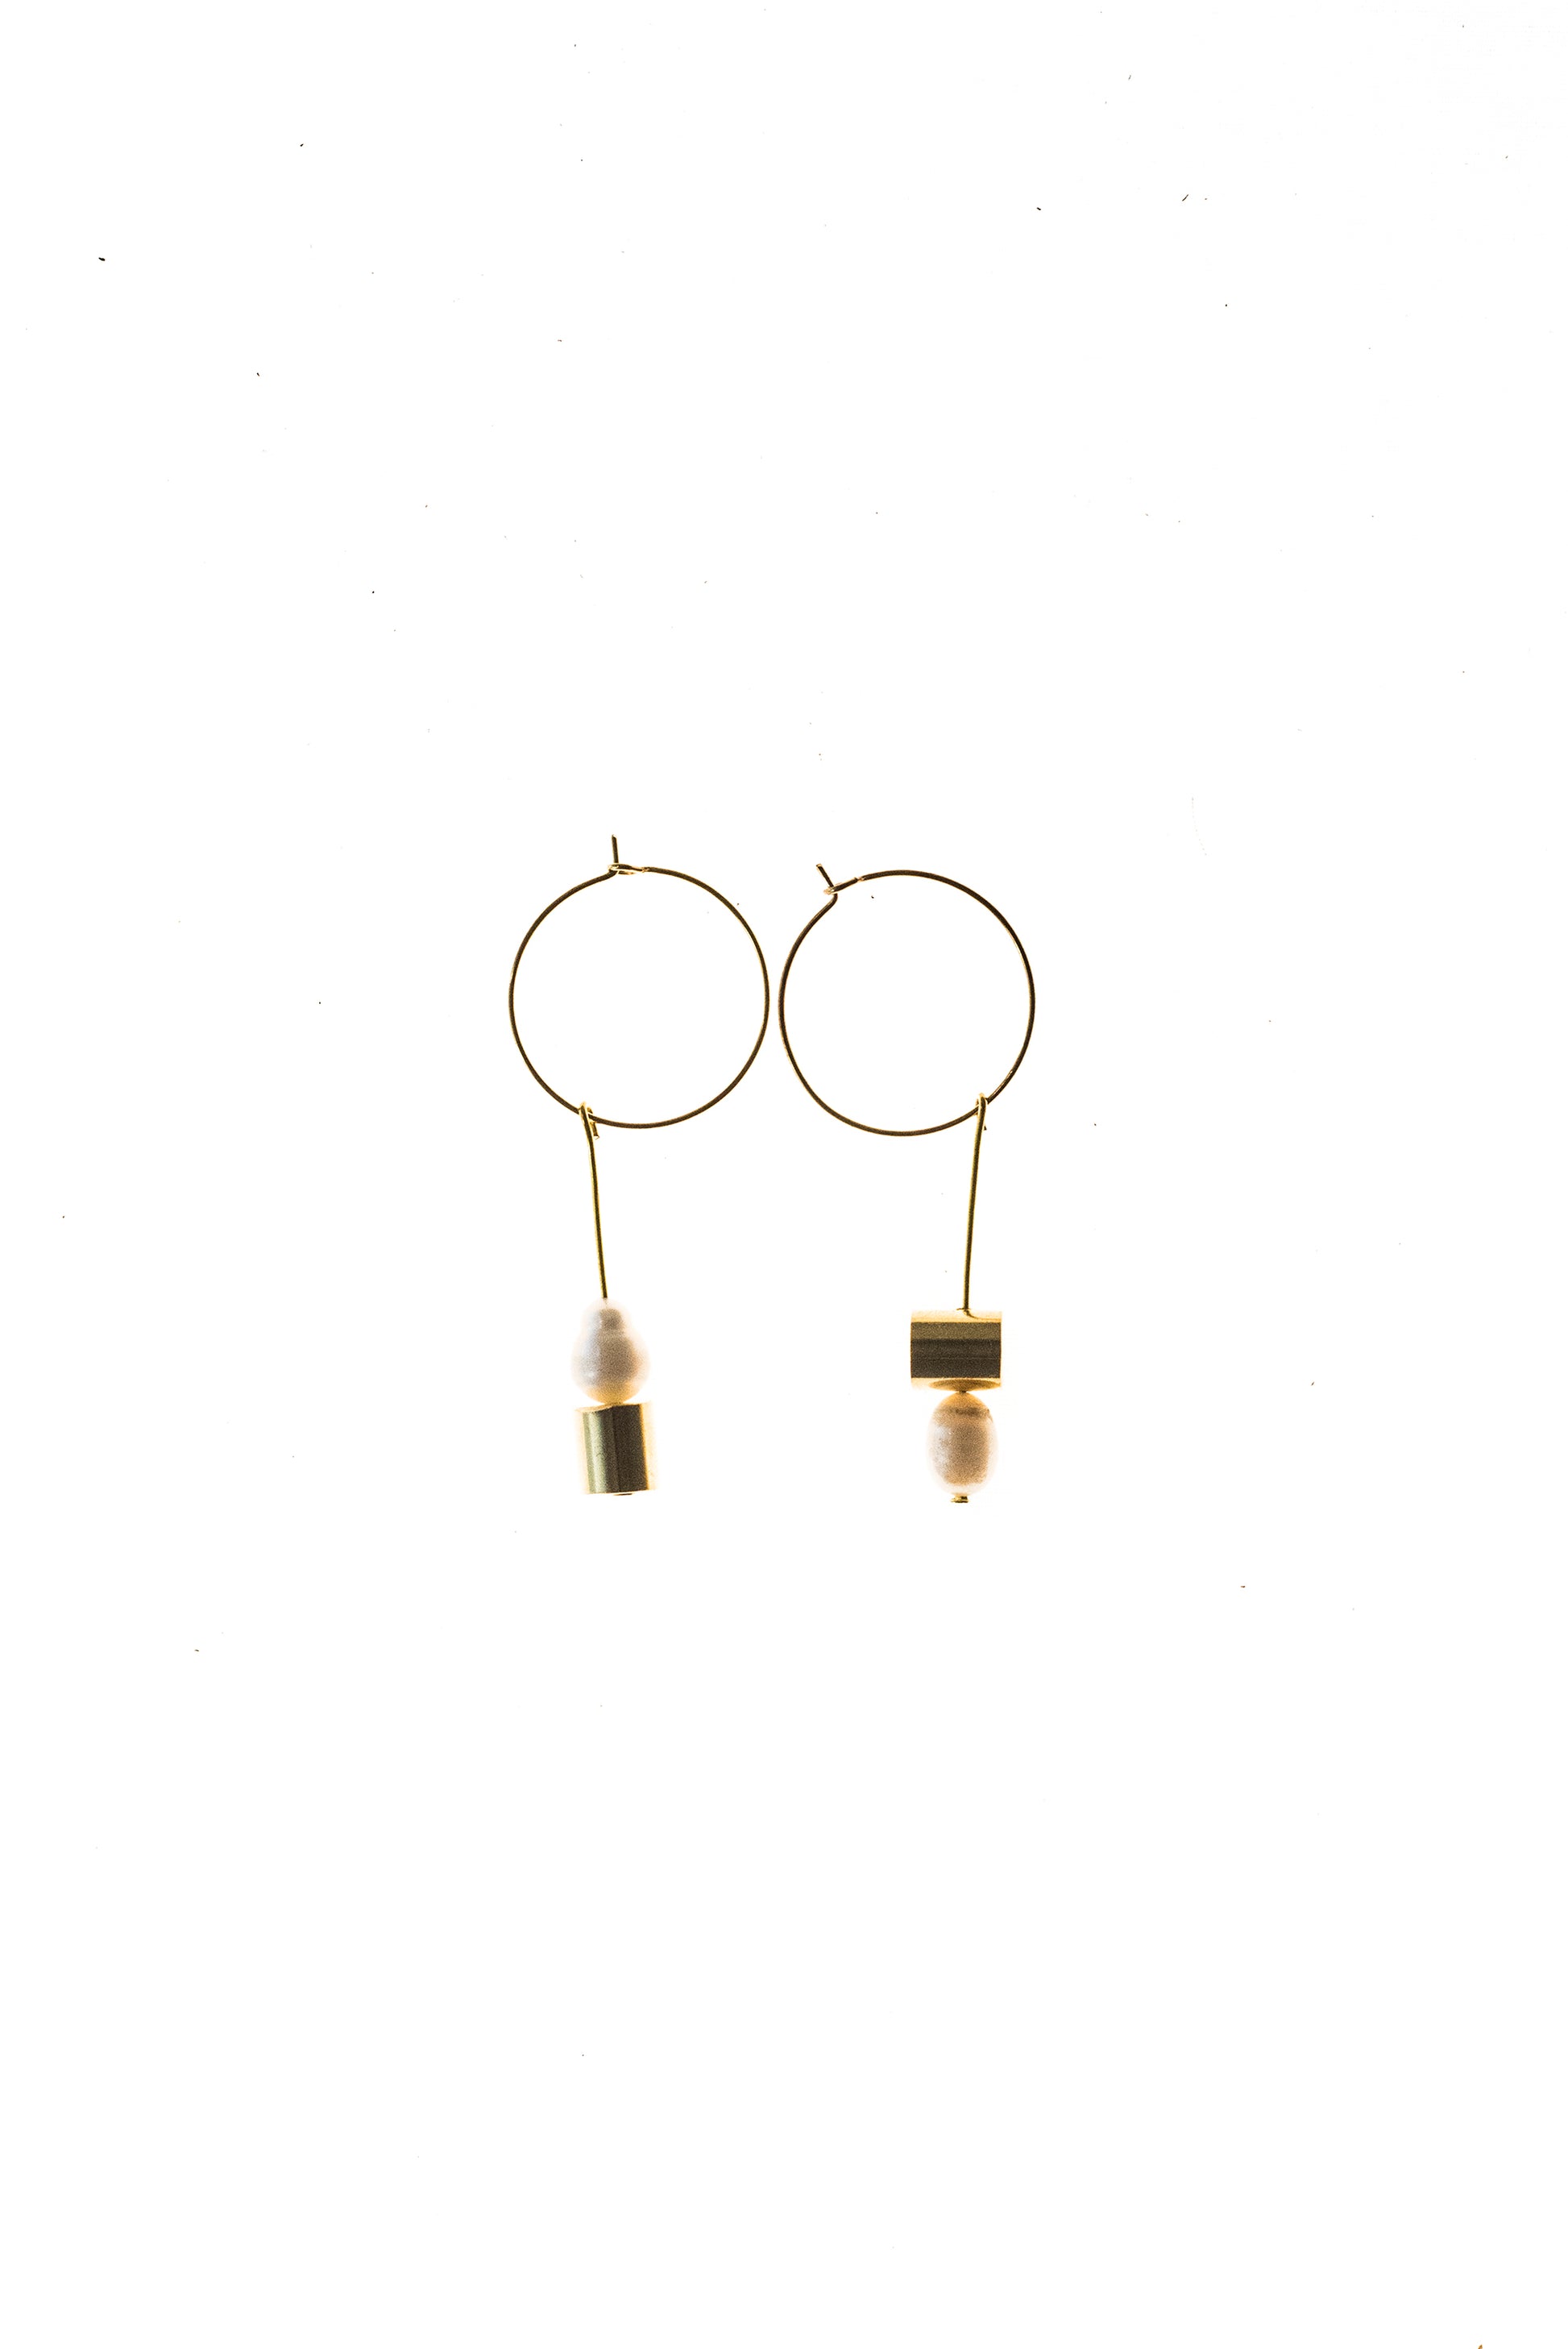 This pair of earring is made of a hoop earring which features 24K gold-plated brass and detachable pendant made of 24K gold-plated brass and freshwater pearl.